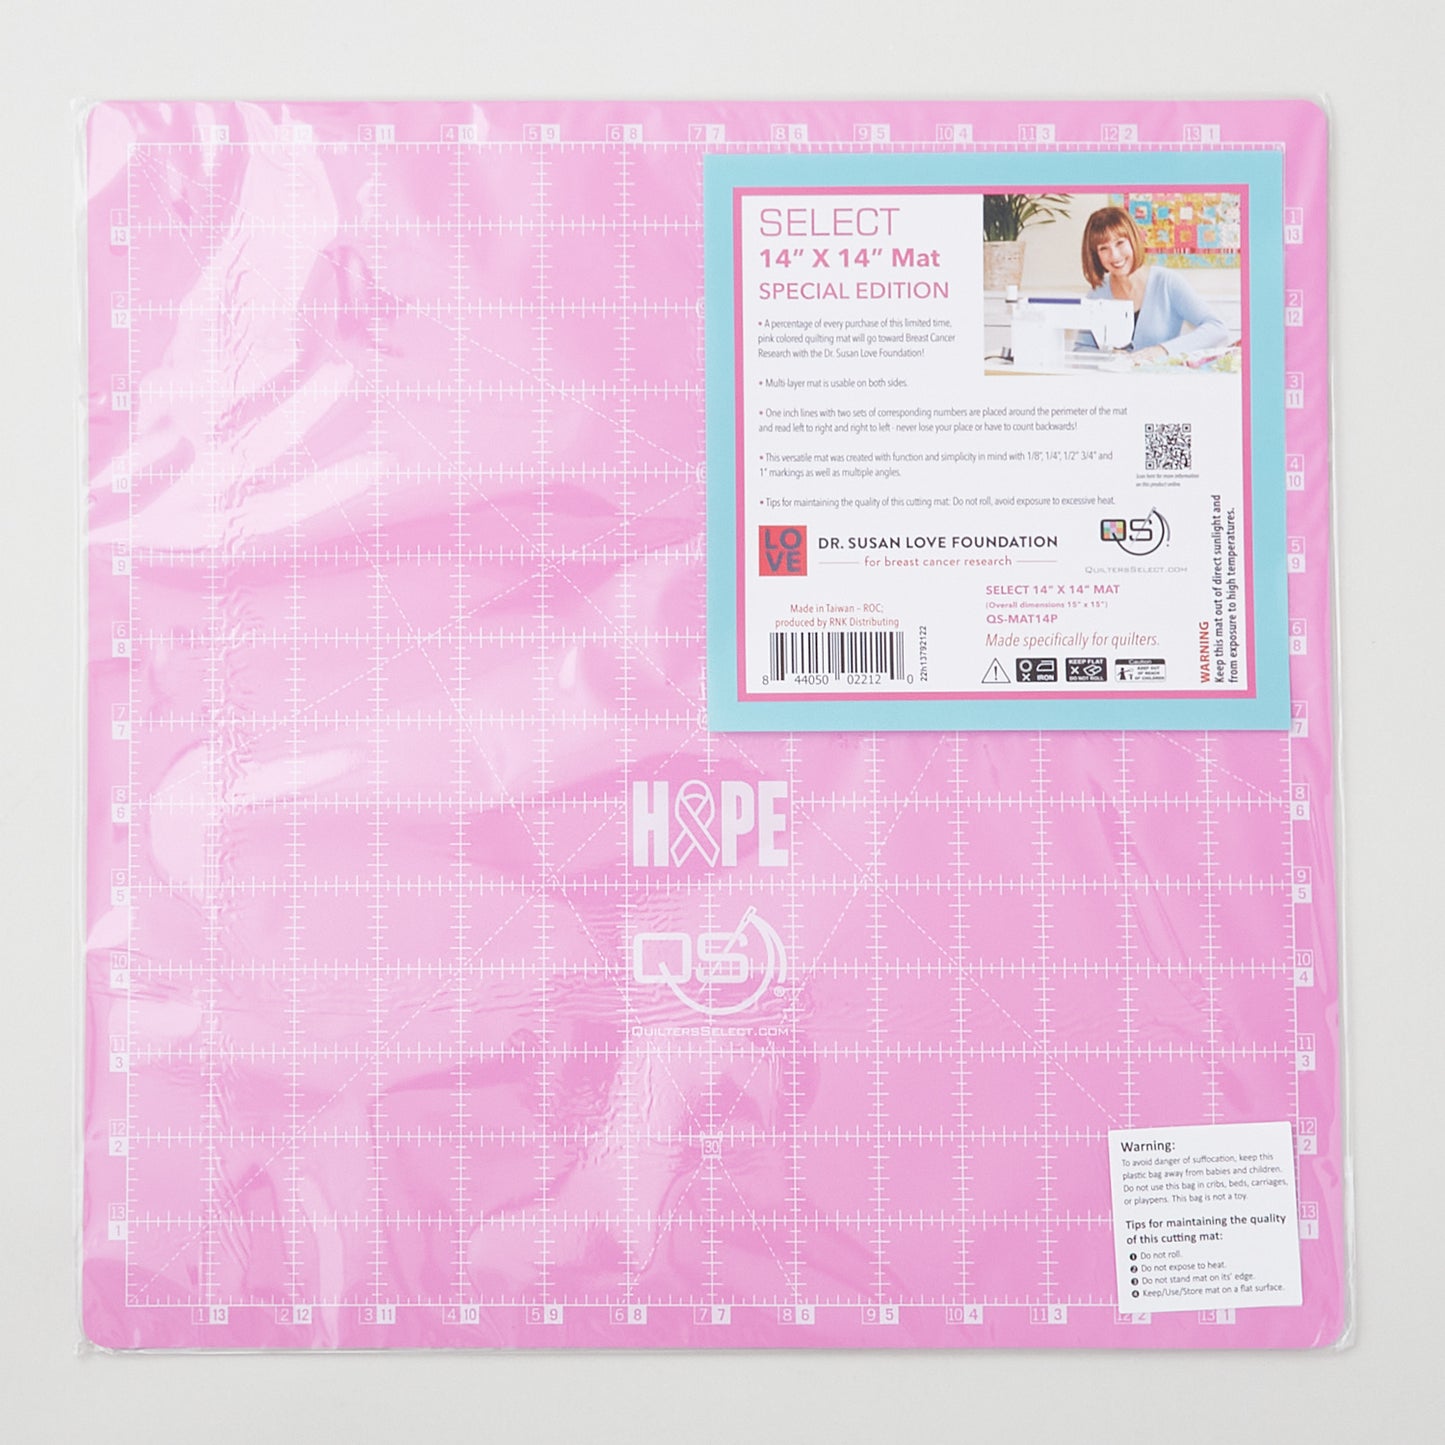 Quilters Select Pink Dual Side Cutting Mat - 14" x 14" Alternative View #1